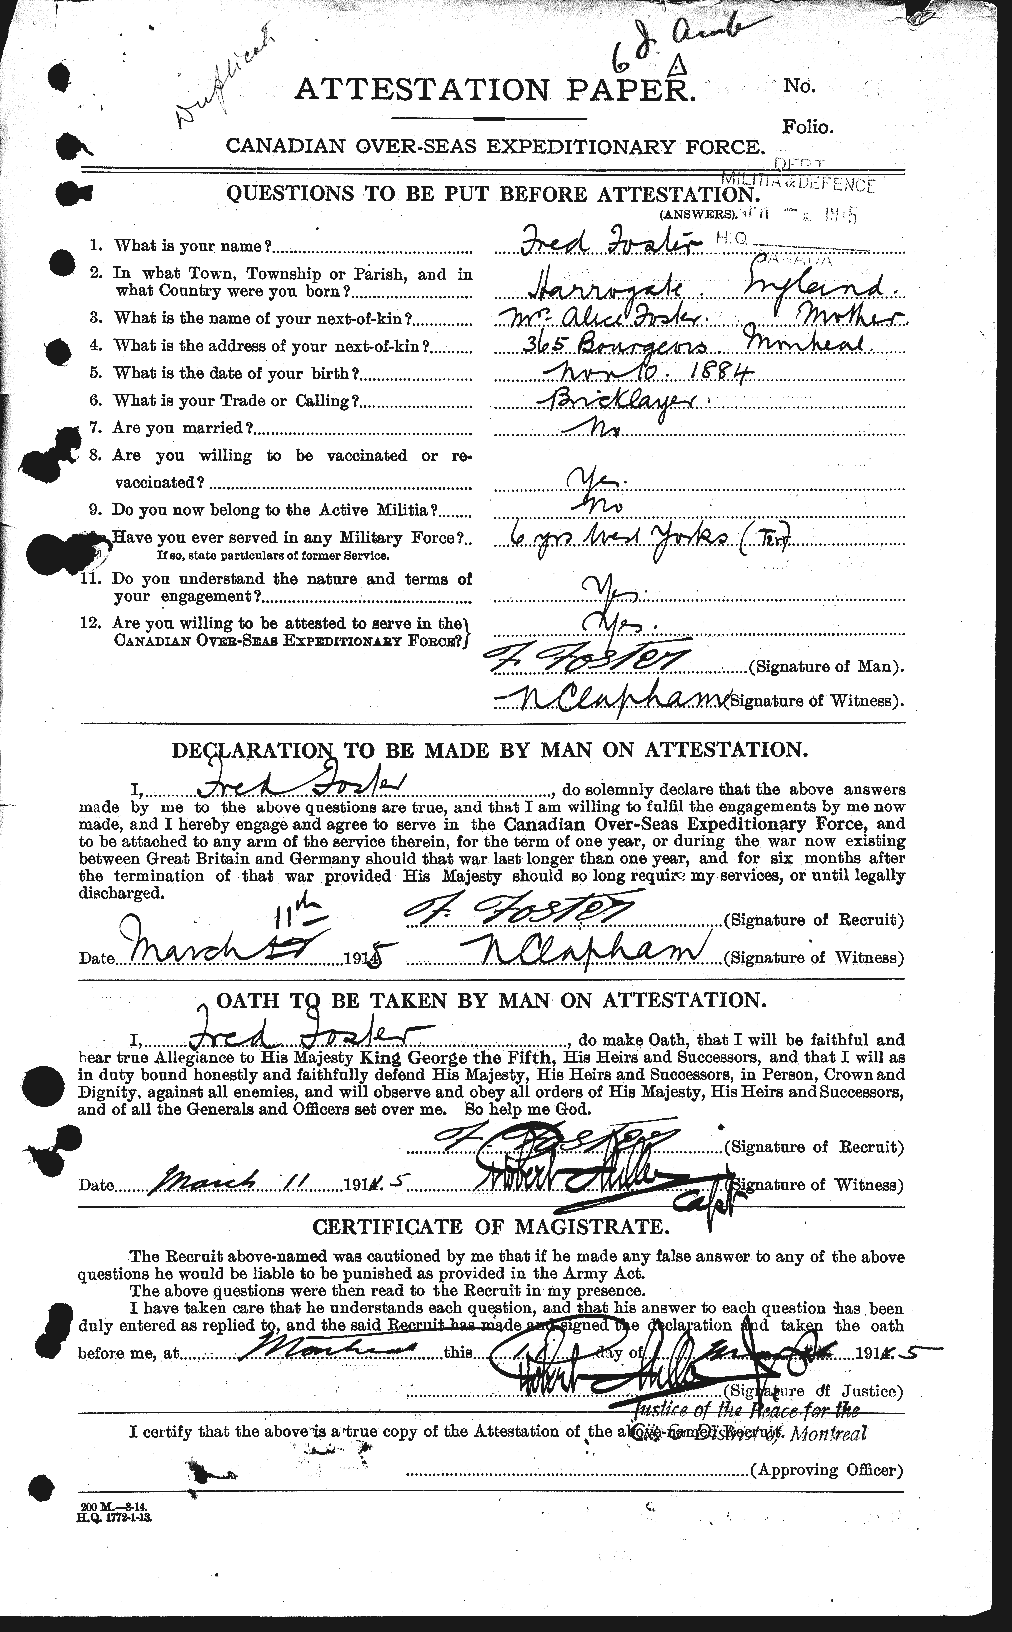 Personnel Records of the First World War - CEF 330632a